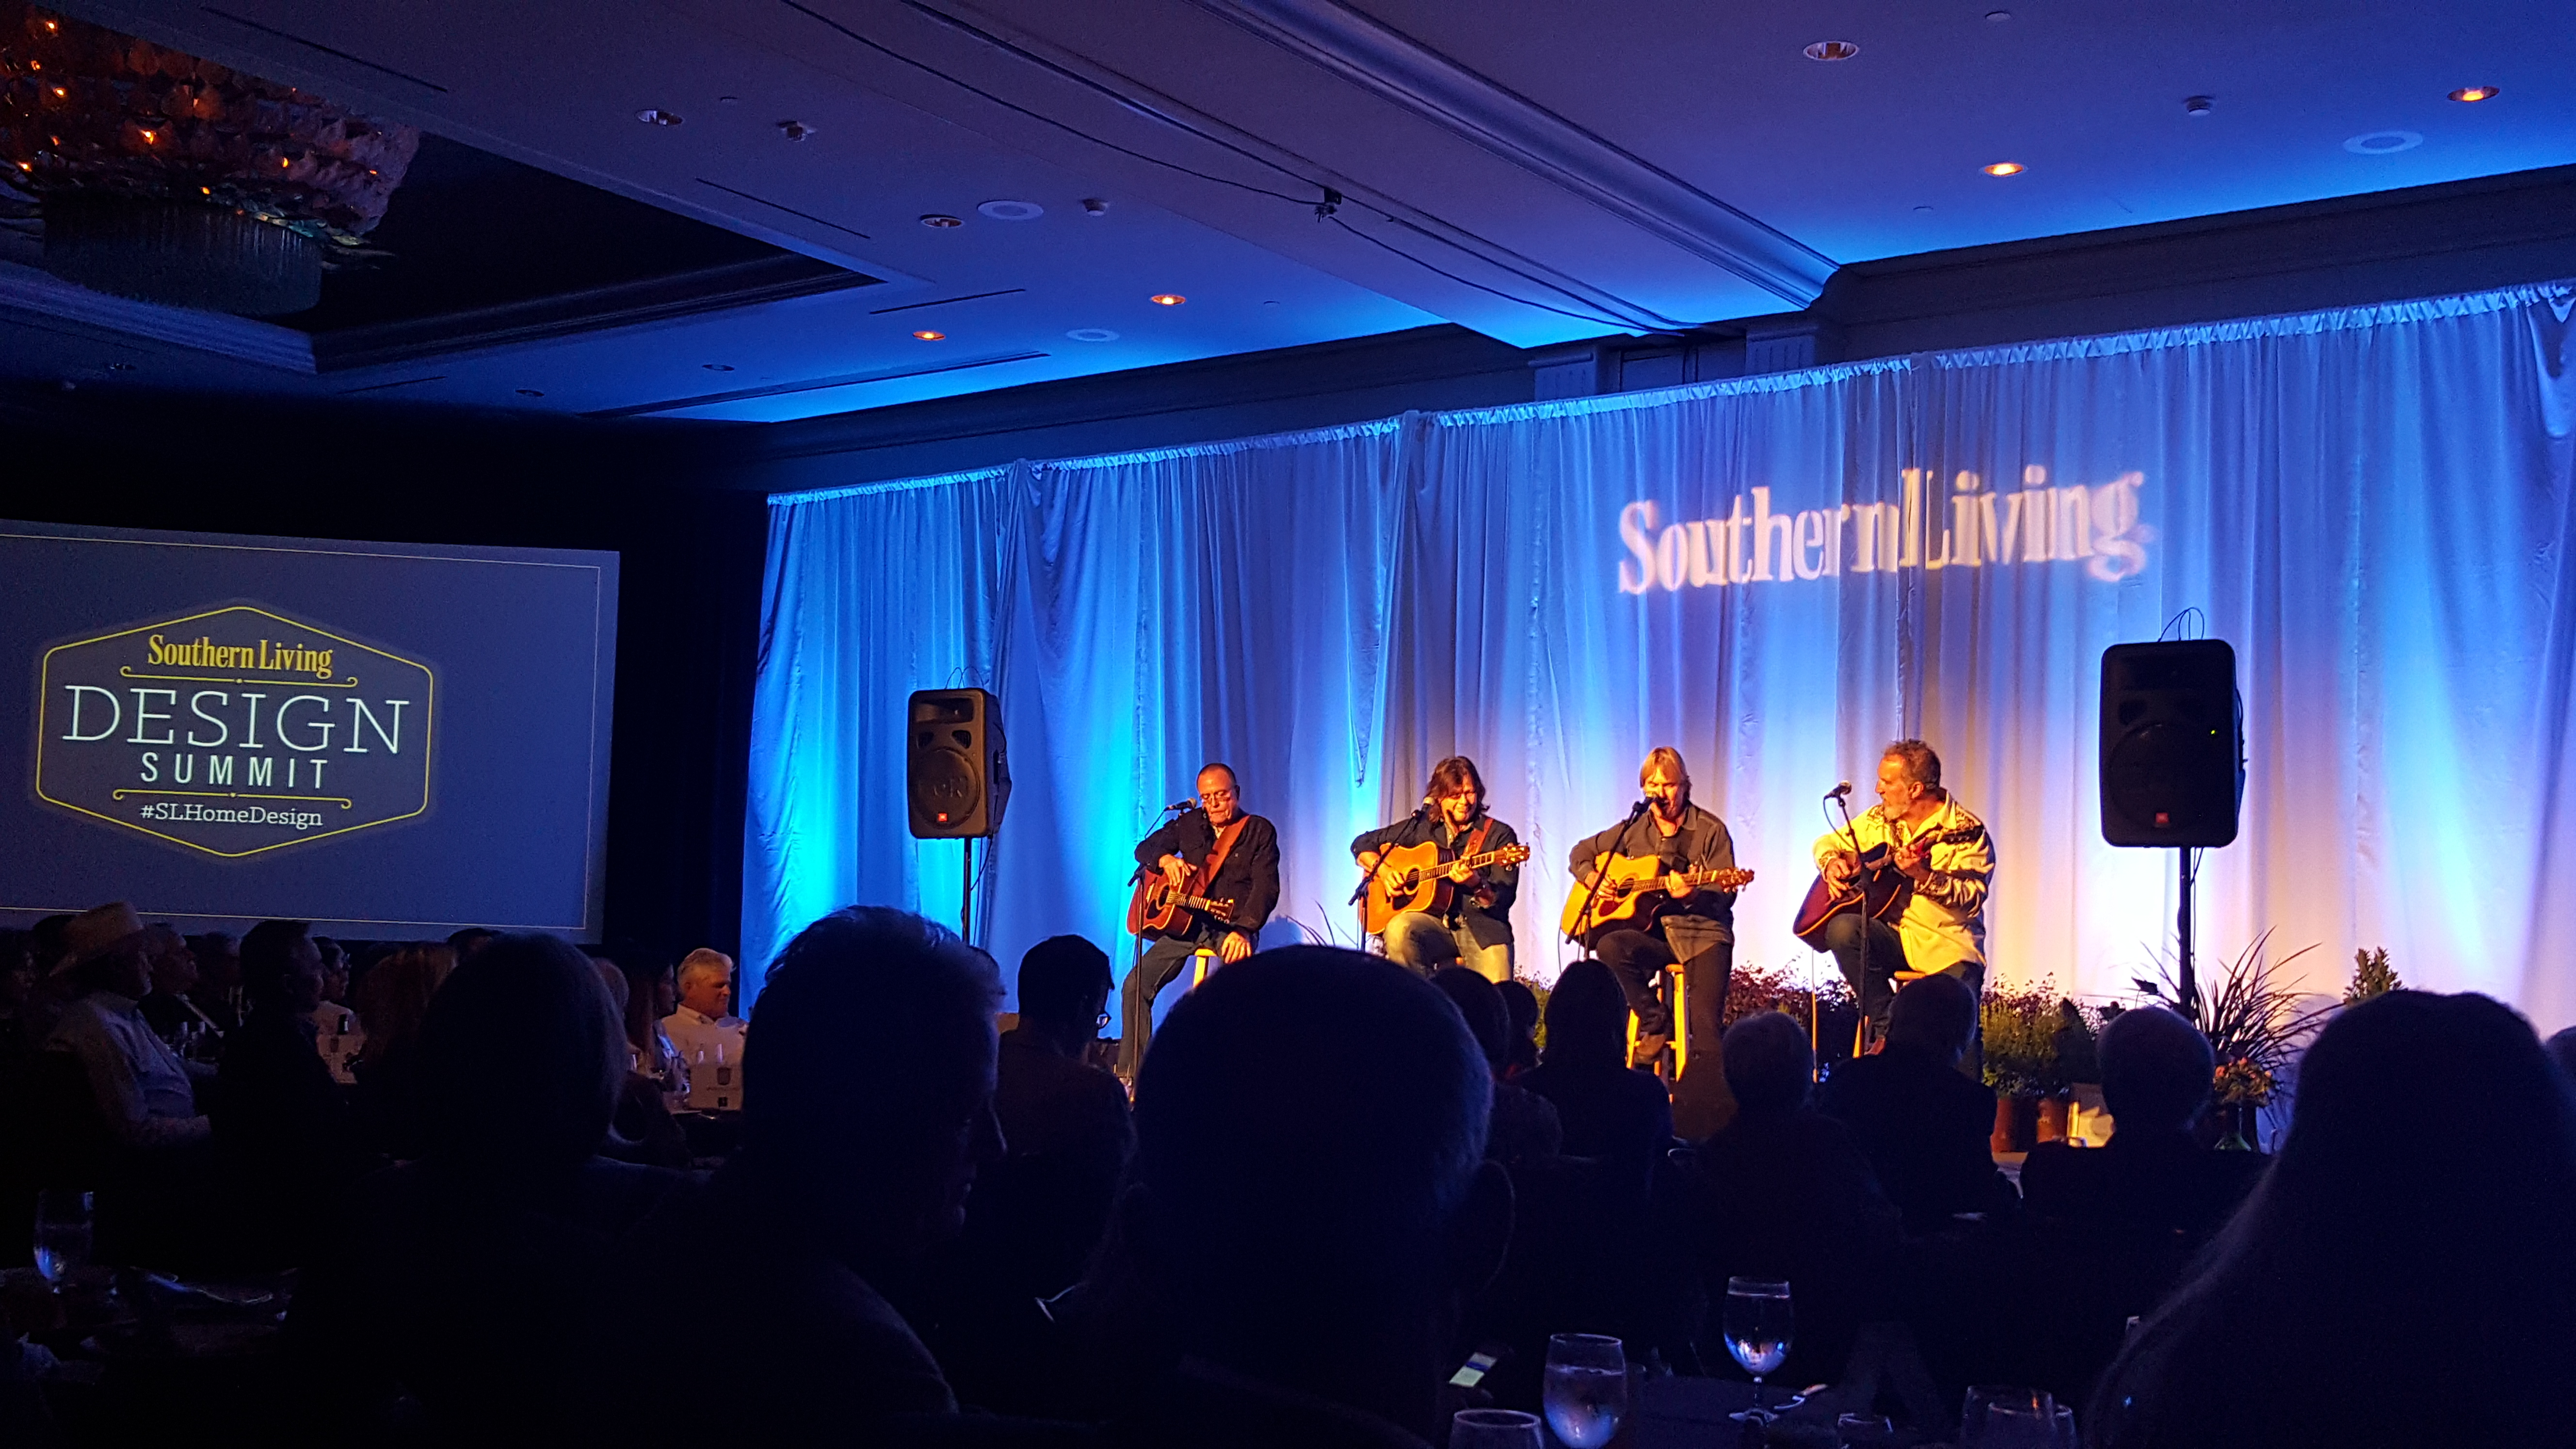 Musicians performing on stage at the Southern Living Design Summit